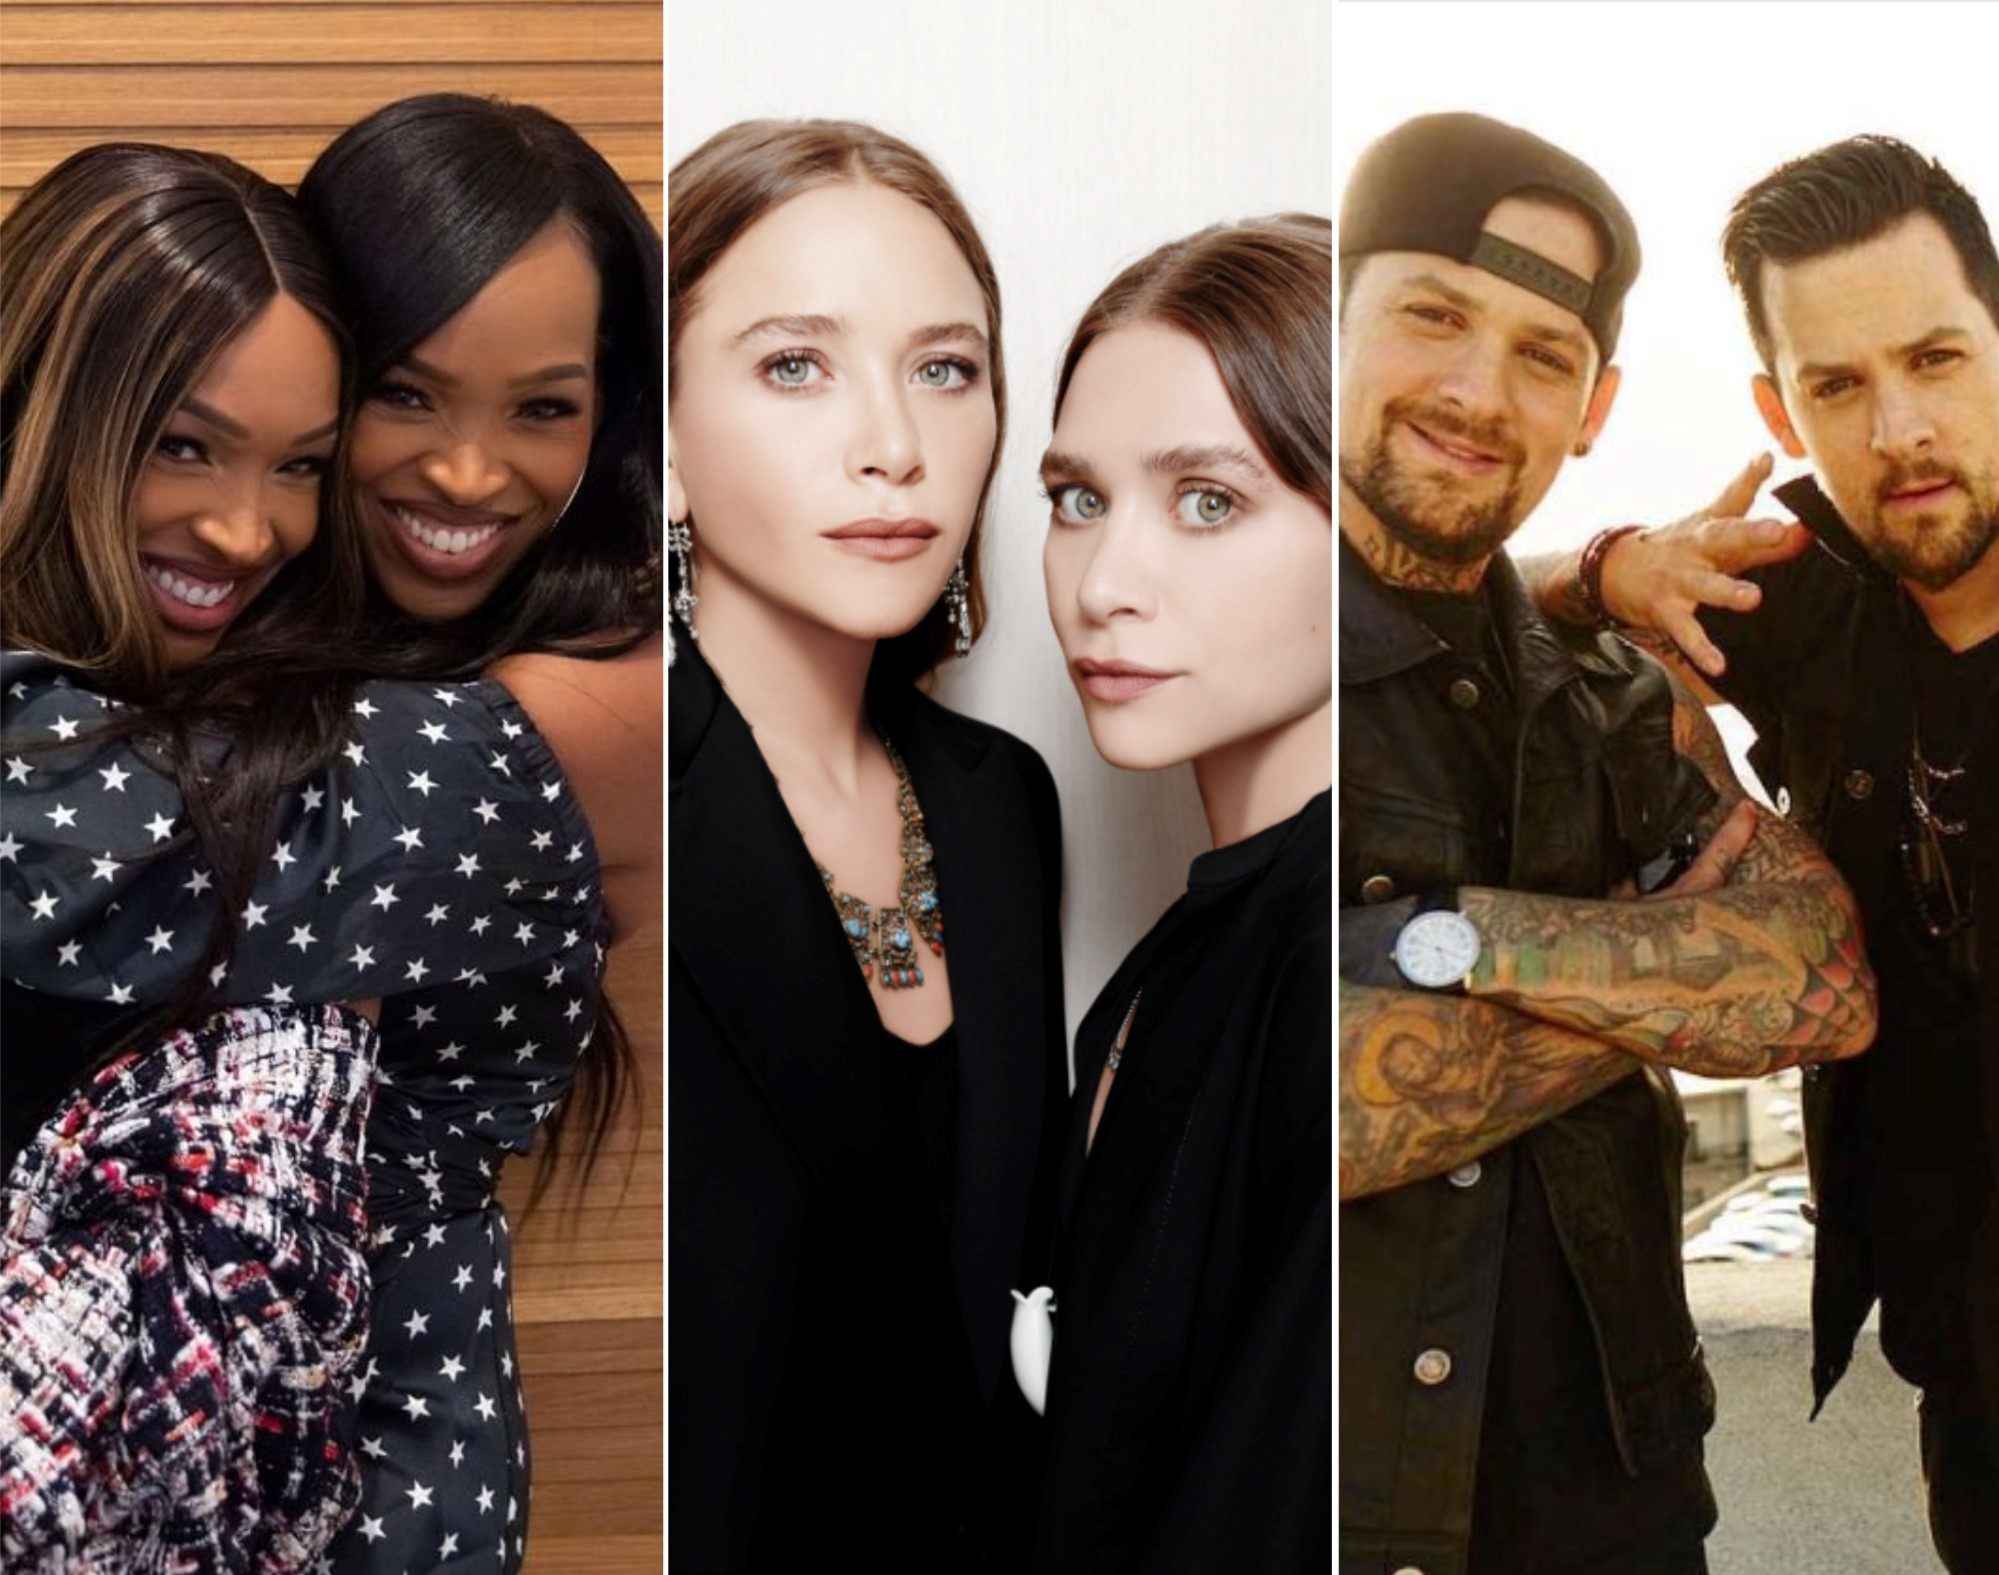 Meet some of the most famous pairs of twins in the US, from Malika and Khadijah Haqq, and Mary-Kate and Ashley Olsen, to Benji and Joel Madden. Photos: @foreverkhadijah, @benjaminmadden/Instagram; Lane Crawford